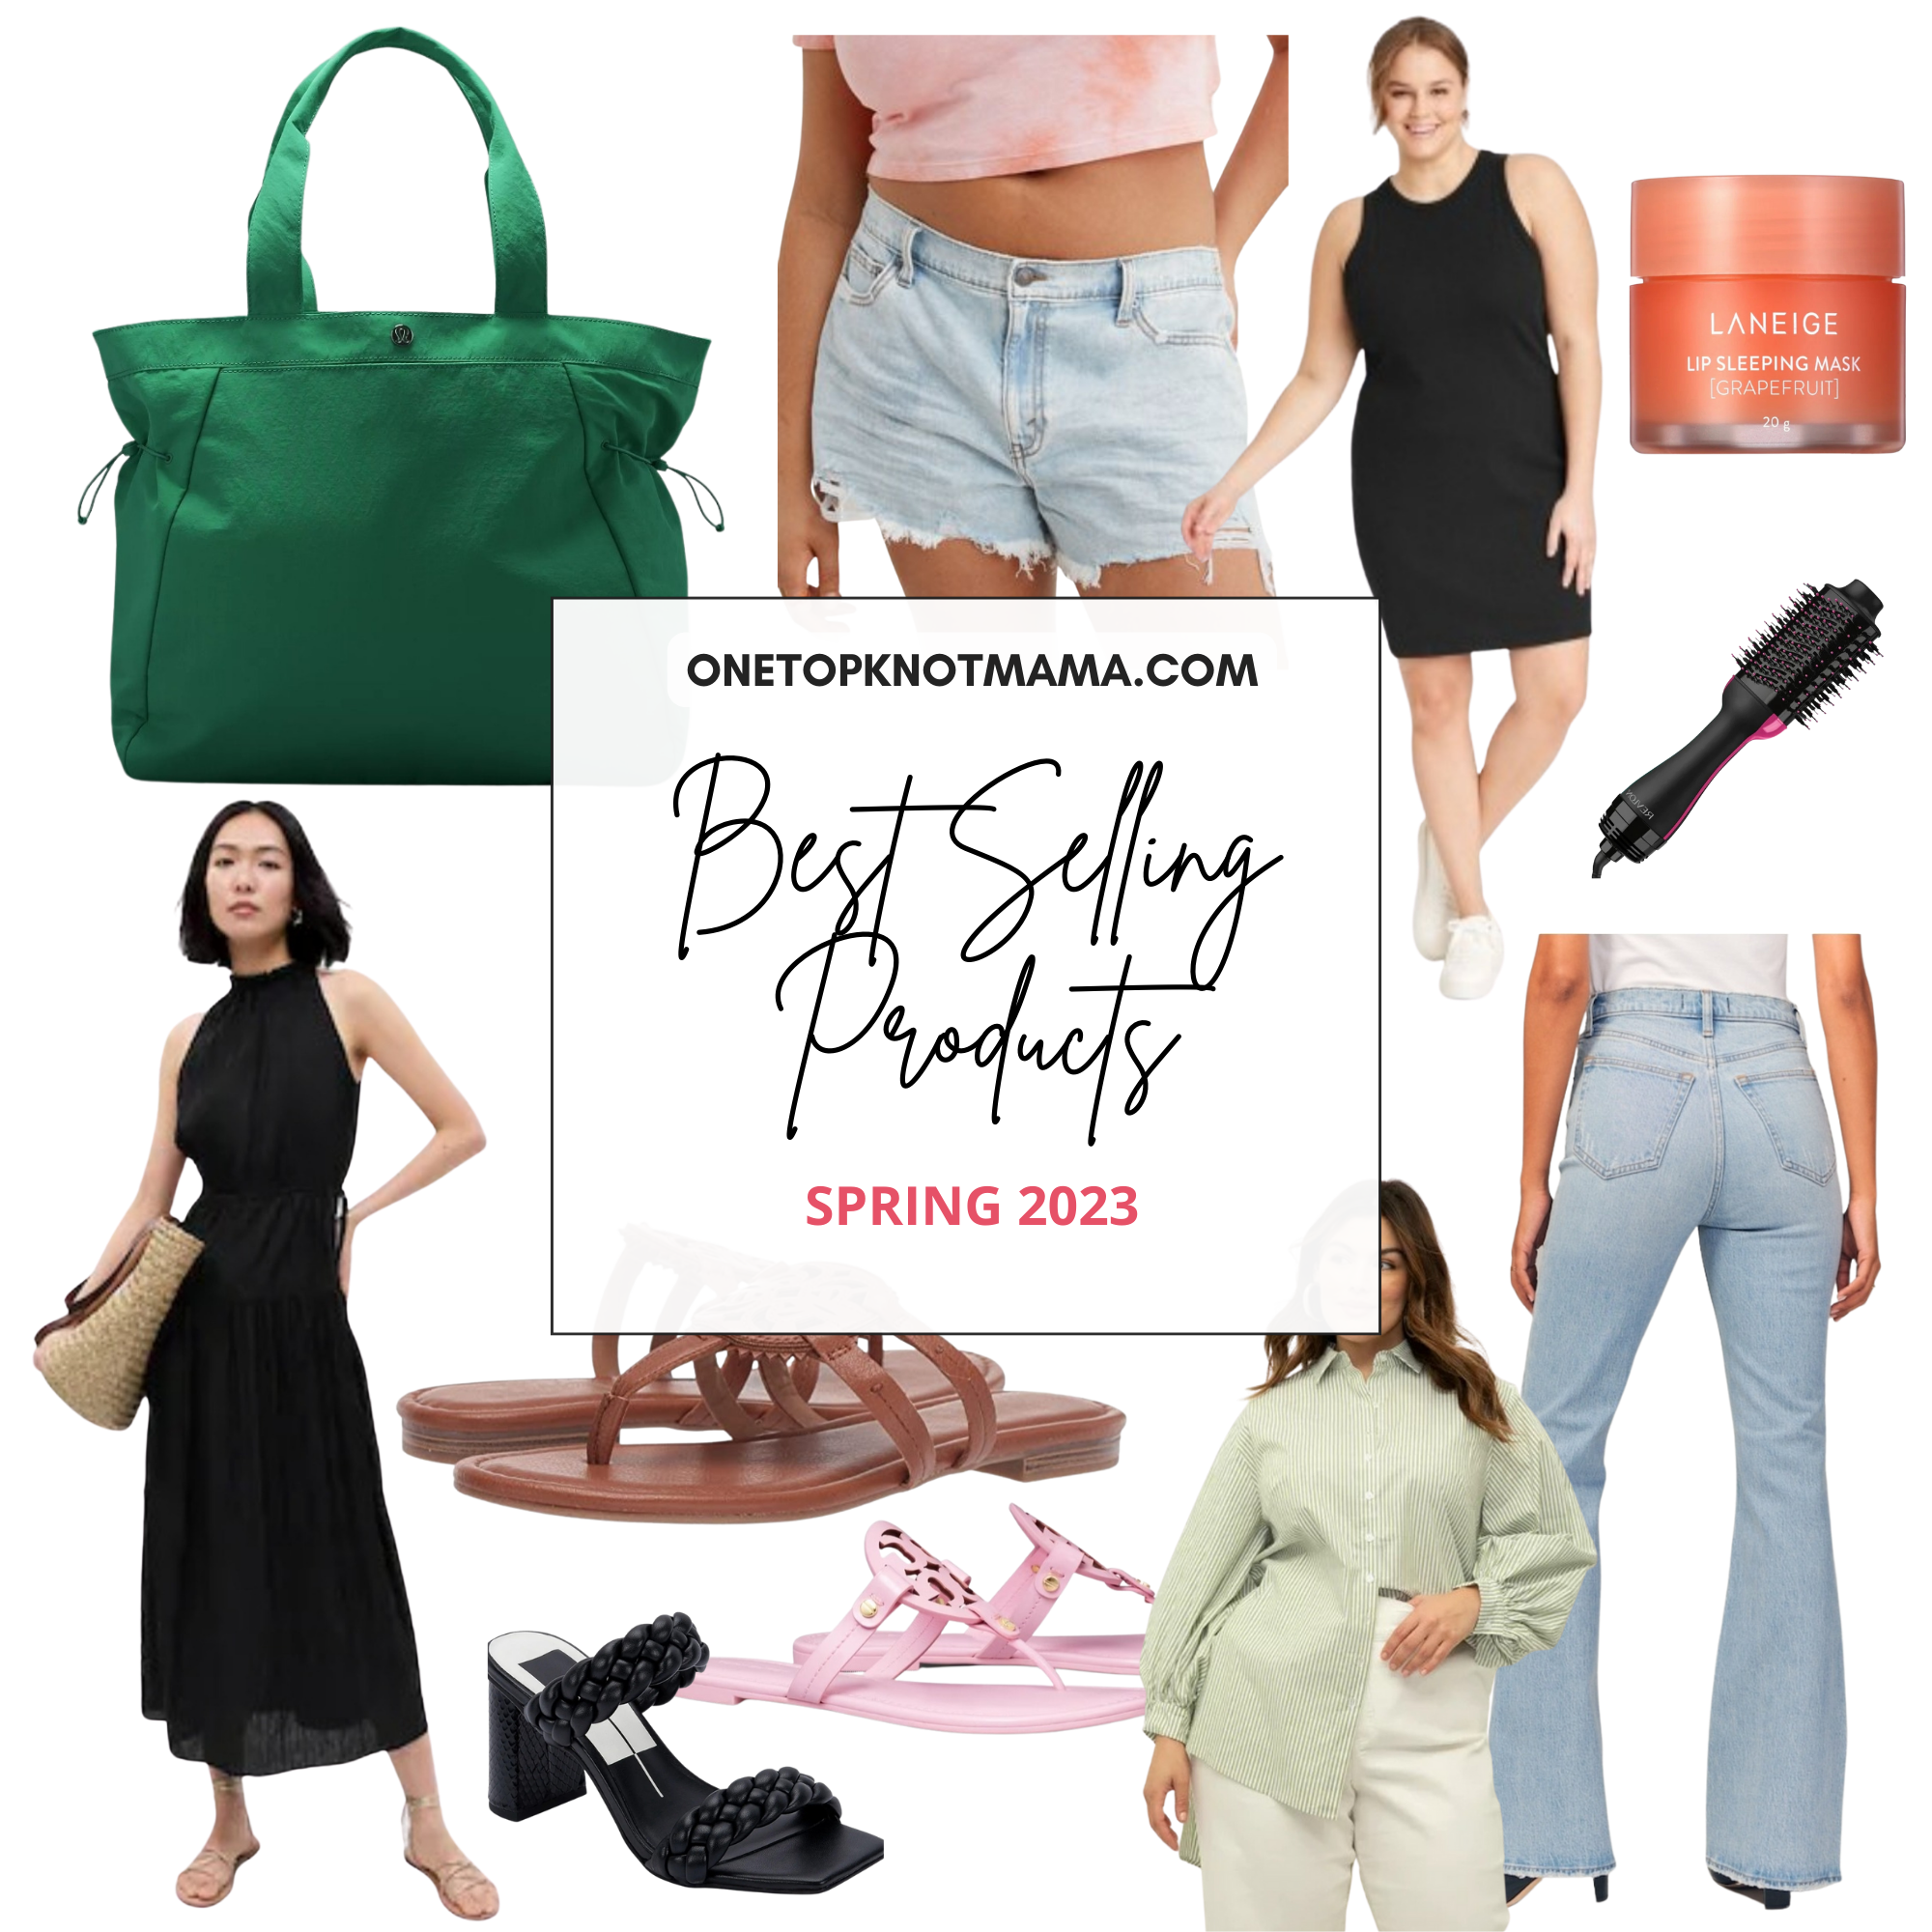 11 Best Selling Products for Women in Spring 2023 ⋆ One Top Knot Mama